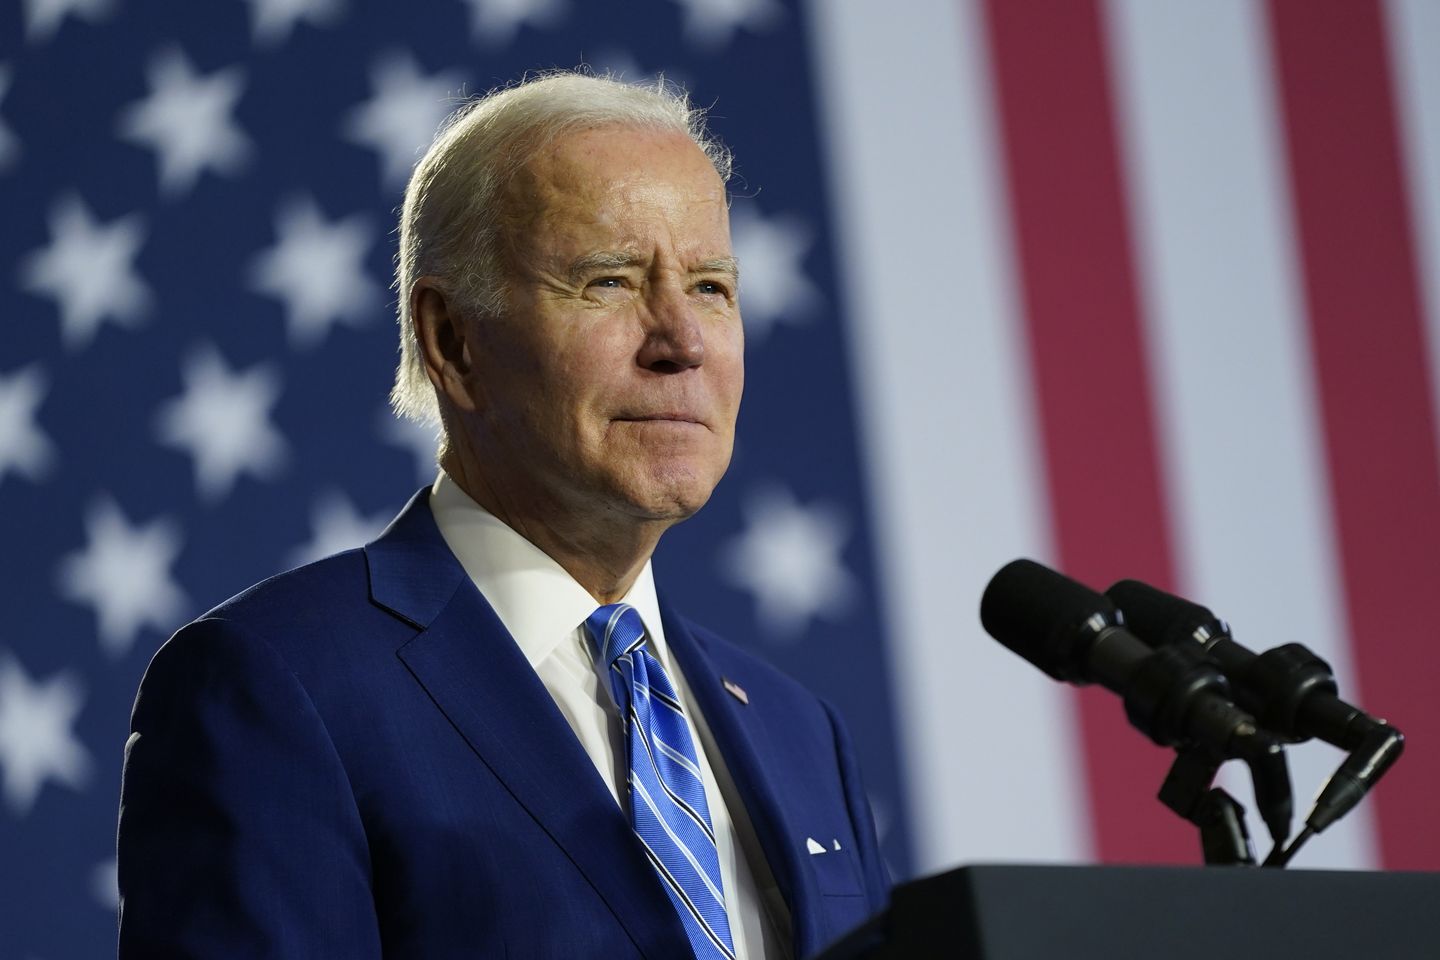 Biden's attorneys transferred cache of docs from Boston law office to National Archives, emails show